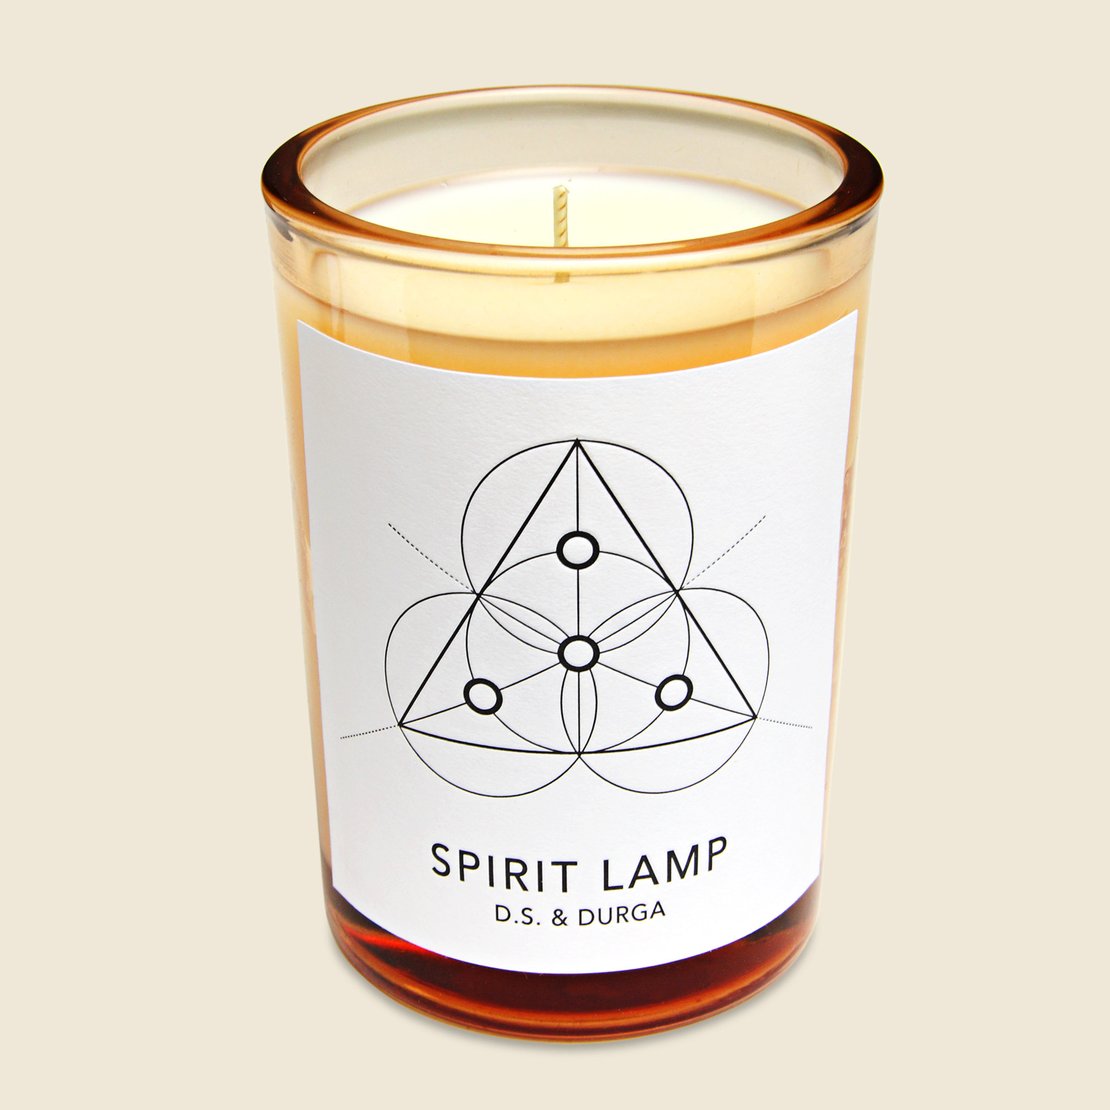 Candle - Spirit Lamp - D.S. & Durga - STAG Provisions - W - Gift